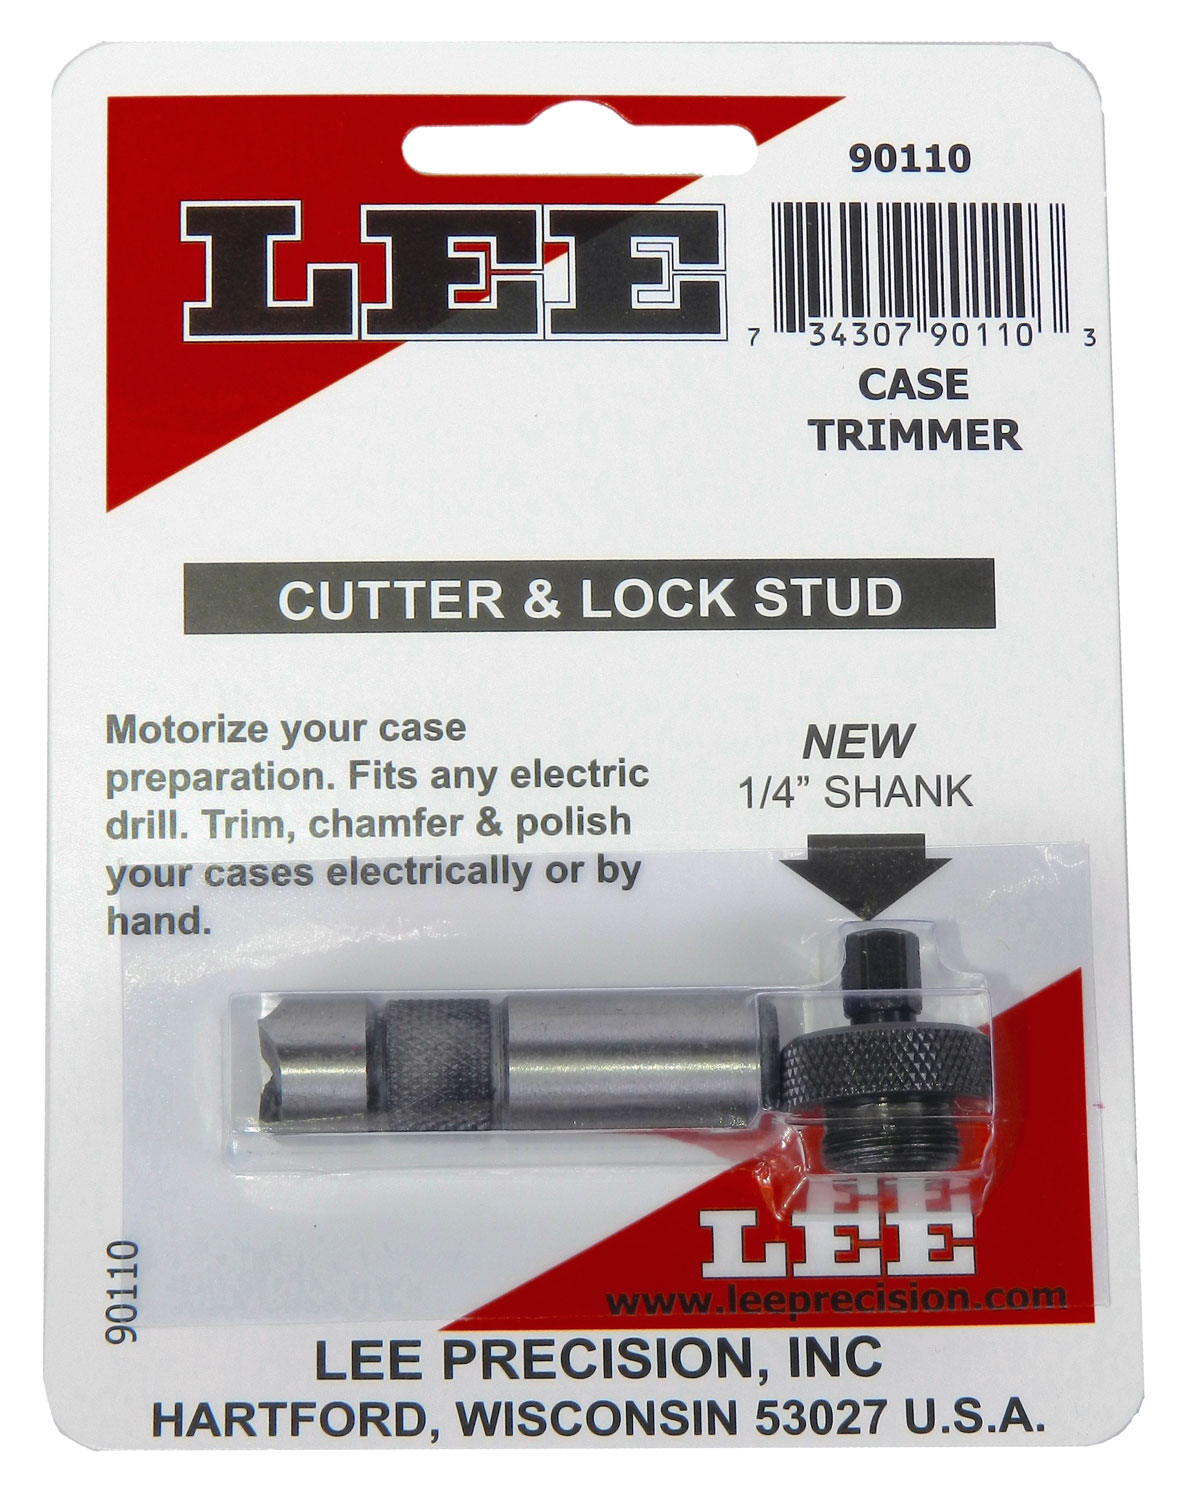 Lee Precision 90110 Cutter & Lock Stud Case Trimmer Stainless Steel